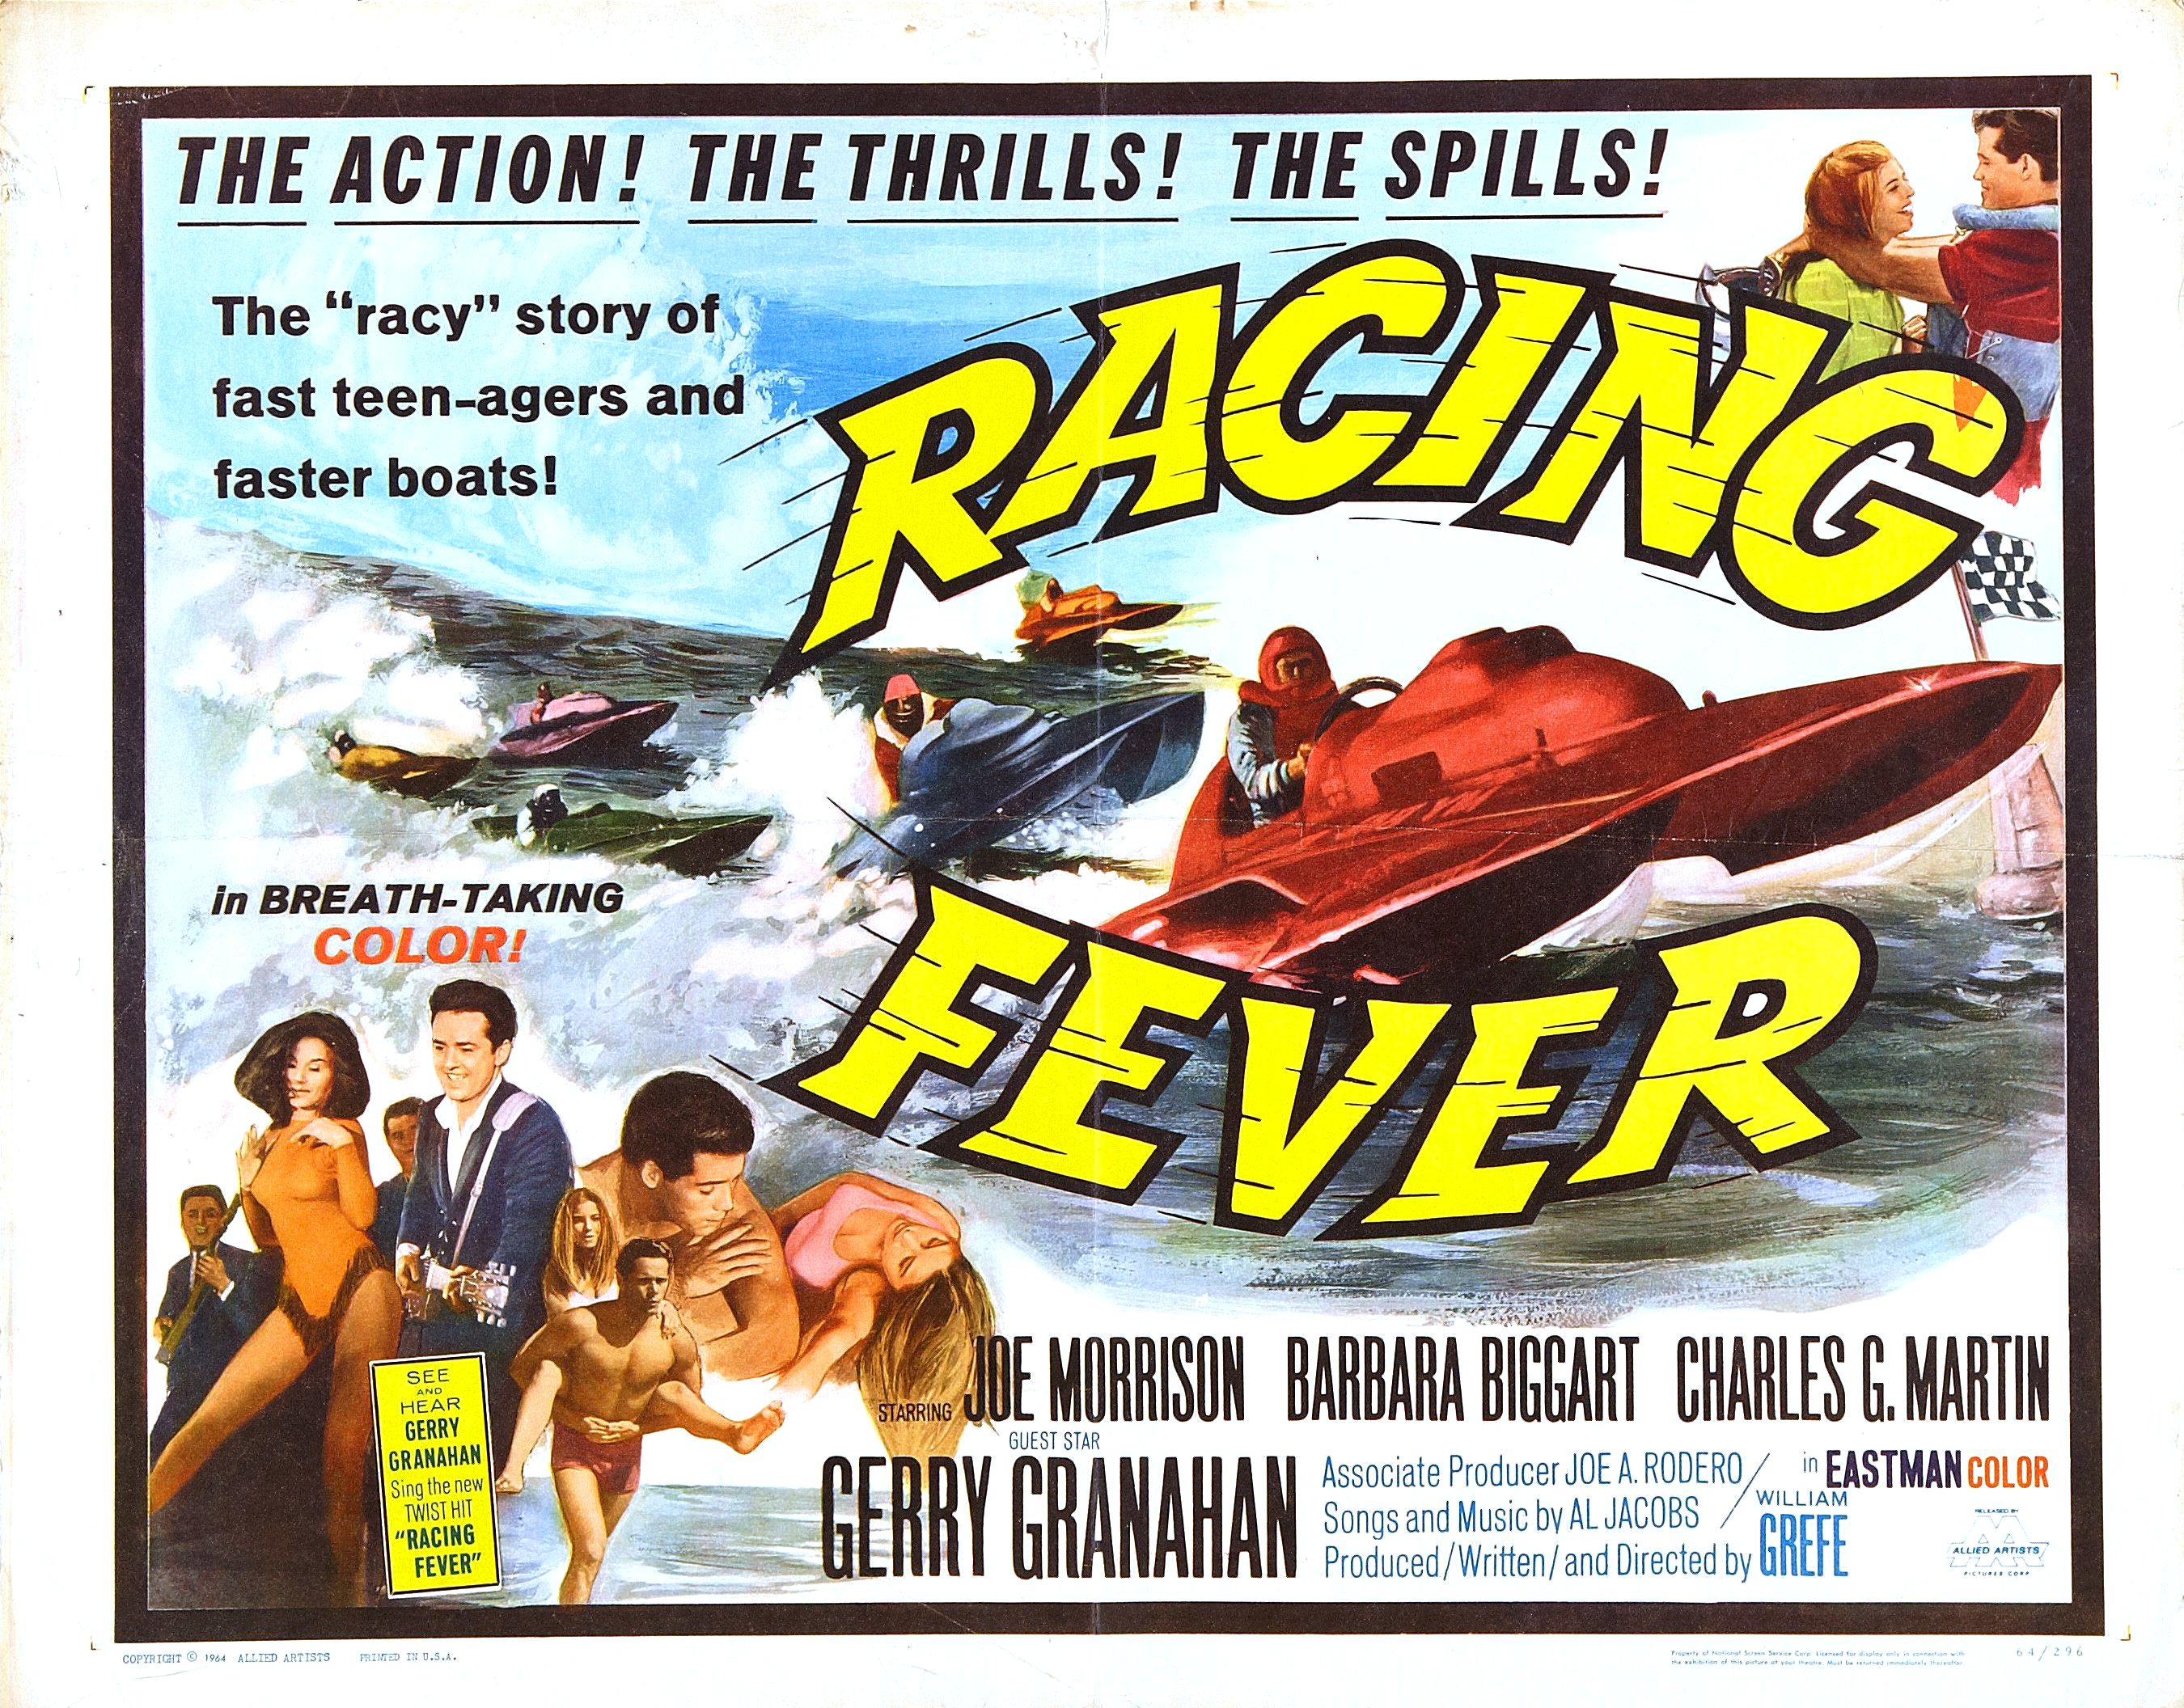 racing fever - The Action! The Thrills! The Spills! The "racy" story of fast teenagers and faster boats! Agro In BreathTaking Colori Lever Orrison Barbara Biggart Charles G. Martin Granan Scing Fever Associate Producer Joe A Rodero Eastman Color In Songs 